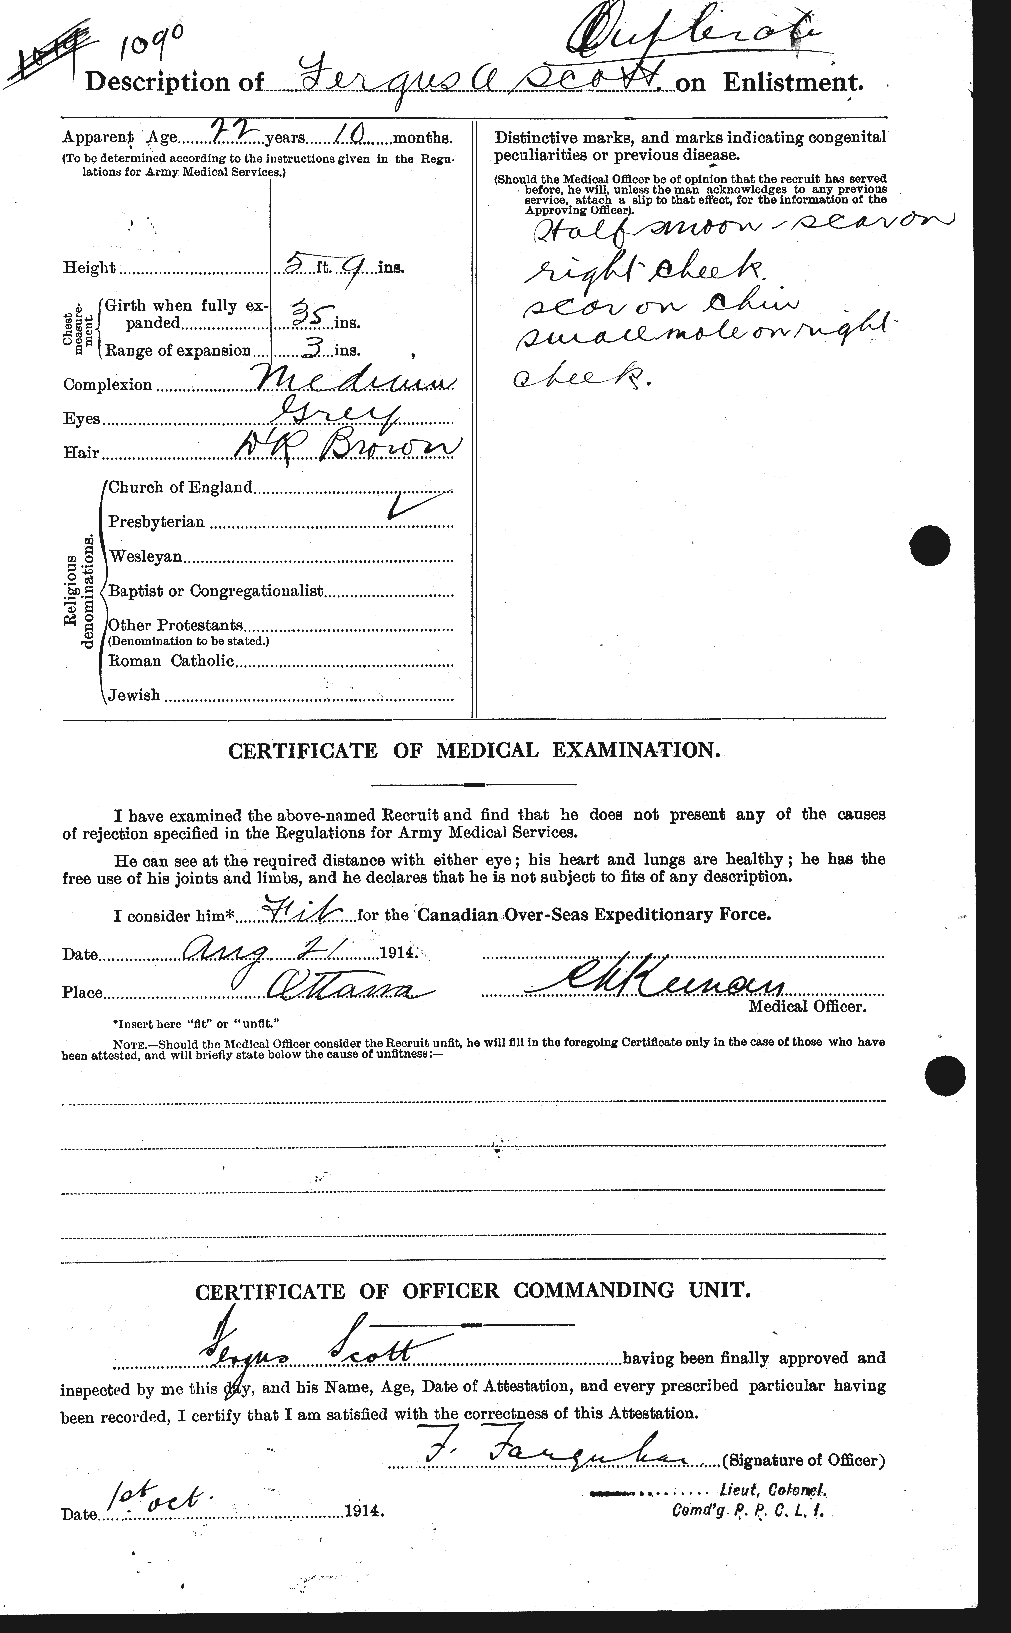 Personnel Records of the First World War - CEF 084998b